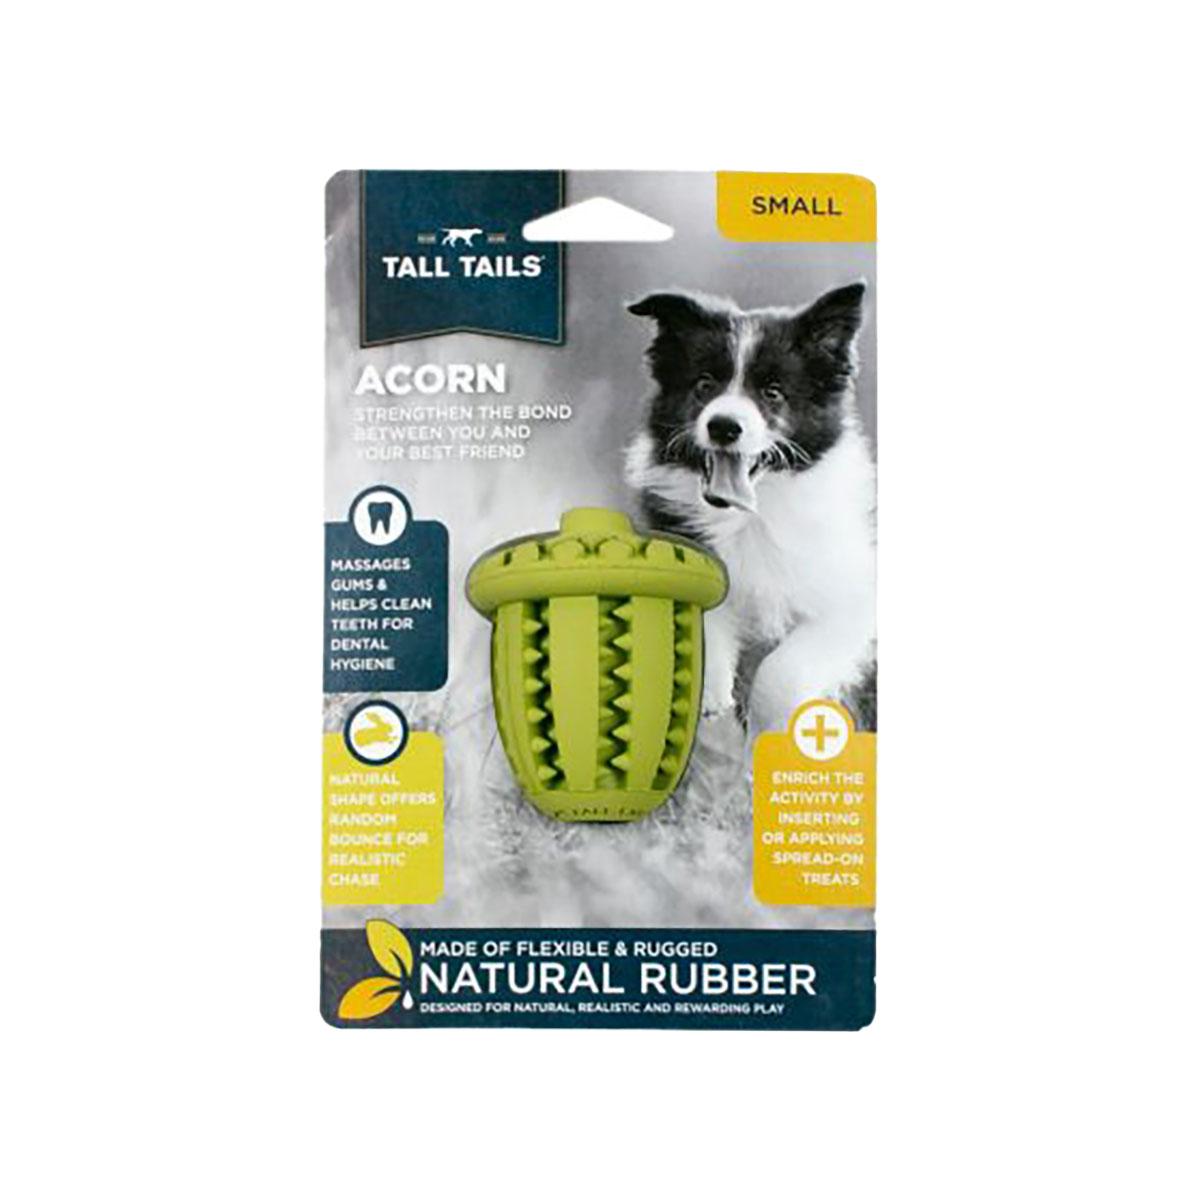 https://images.baxterboo.com/global/images/products/large/tall-tails-natural-rubber-acorn-dog-toy-9239.jpg